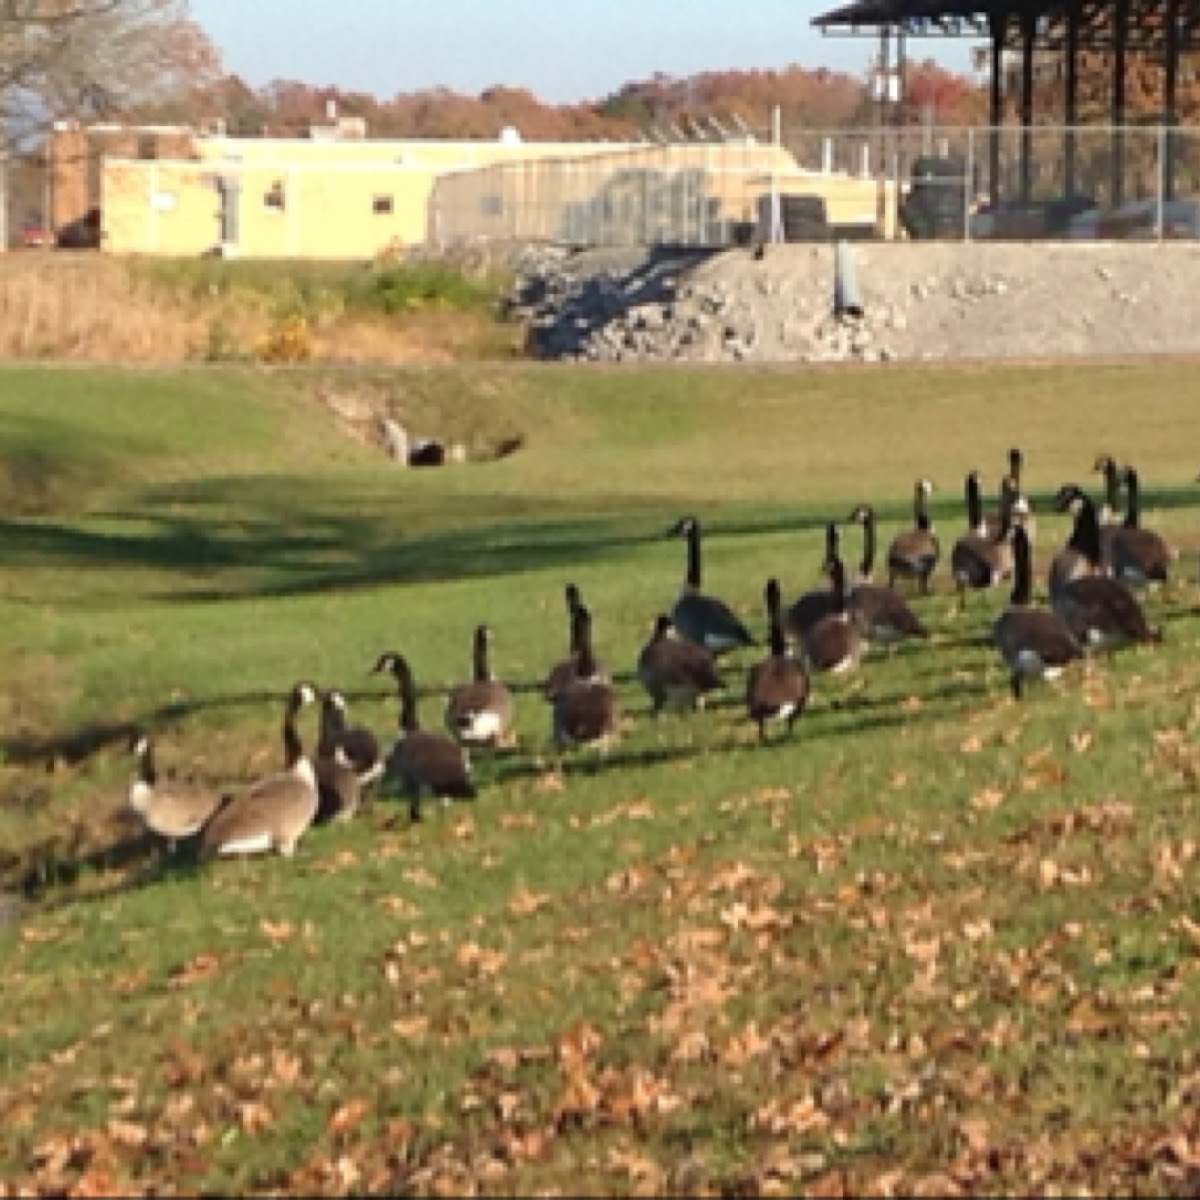 Flock of Canadian Geese